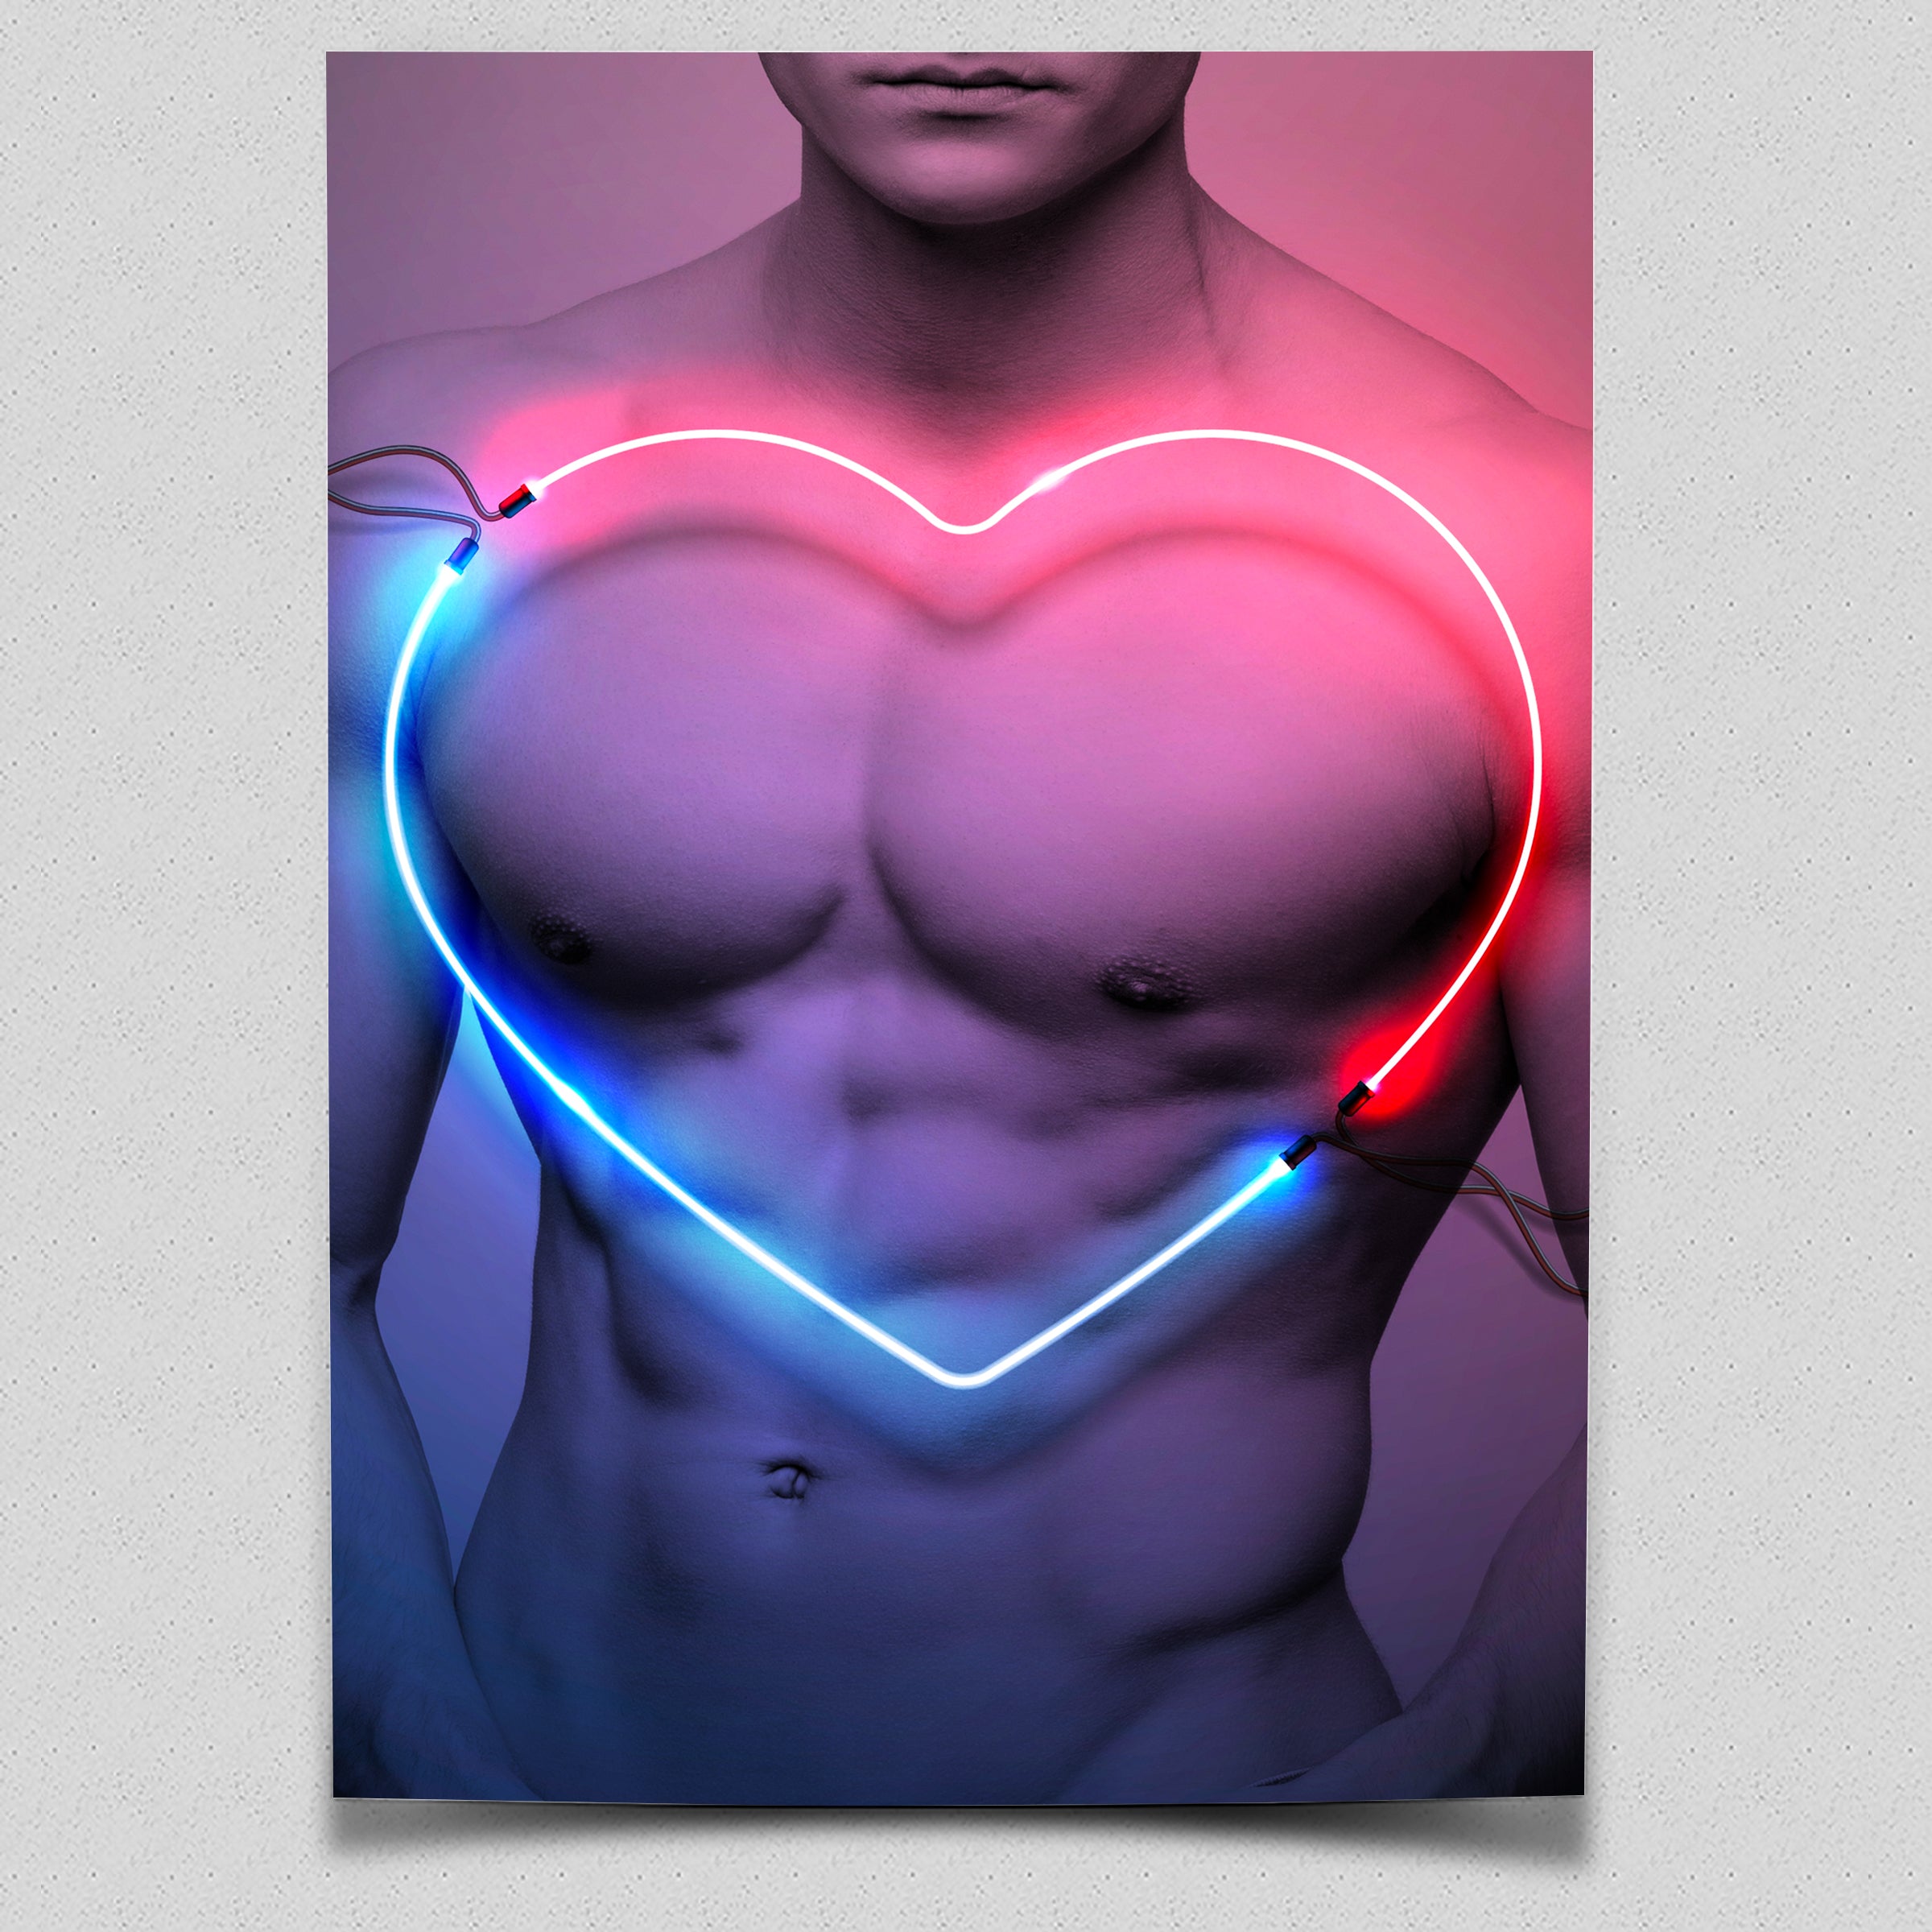 NEON Male - Limited Edition Art Print